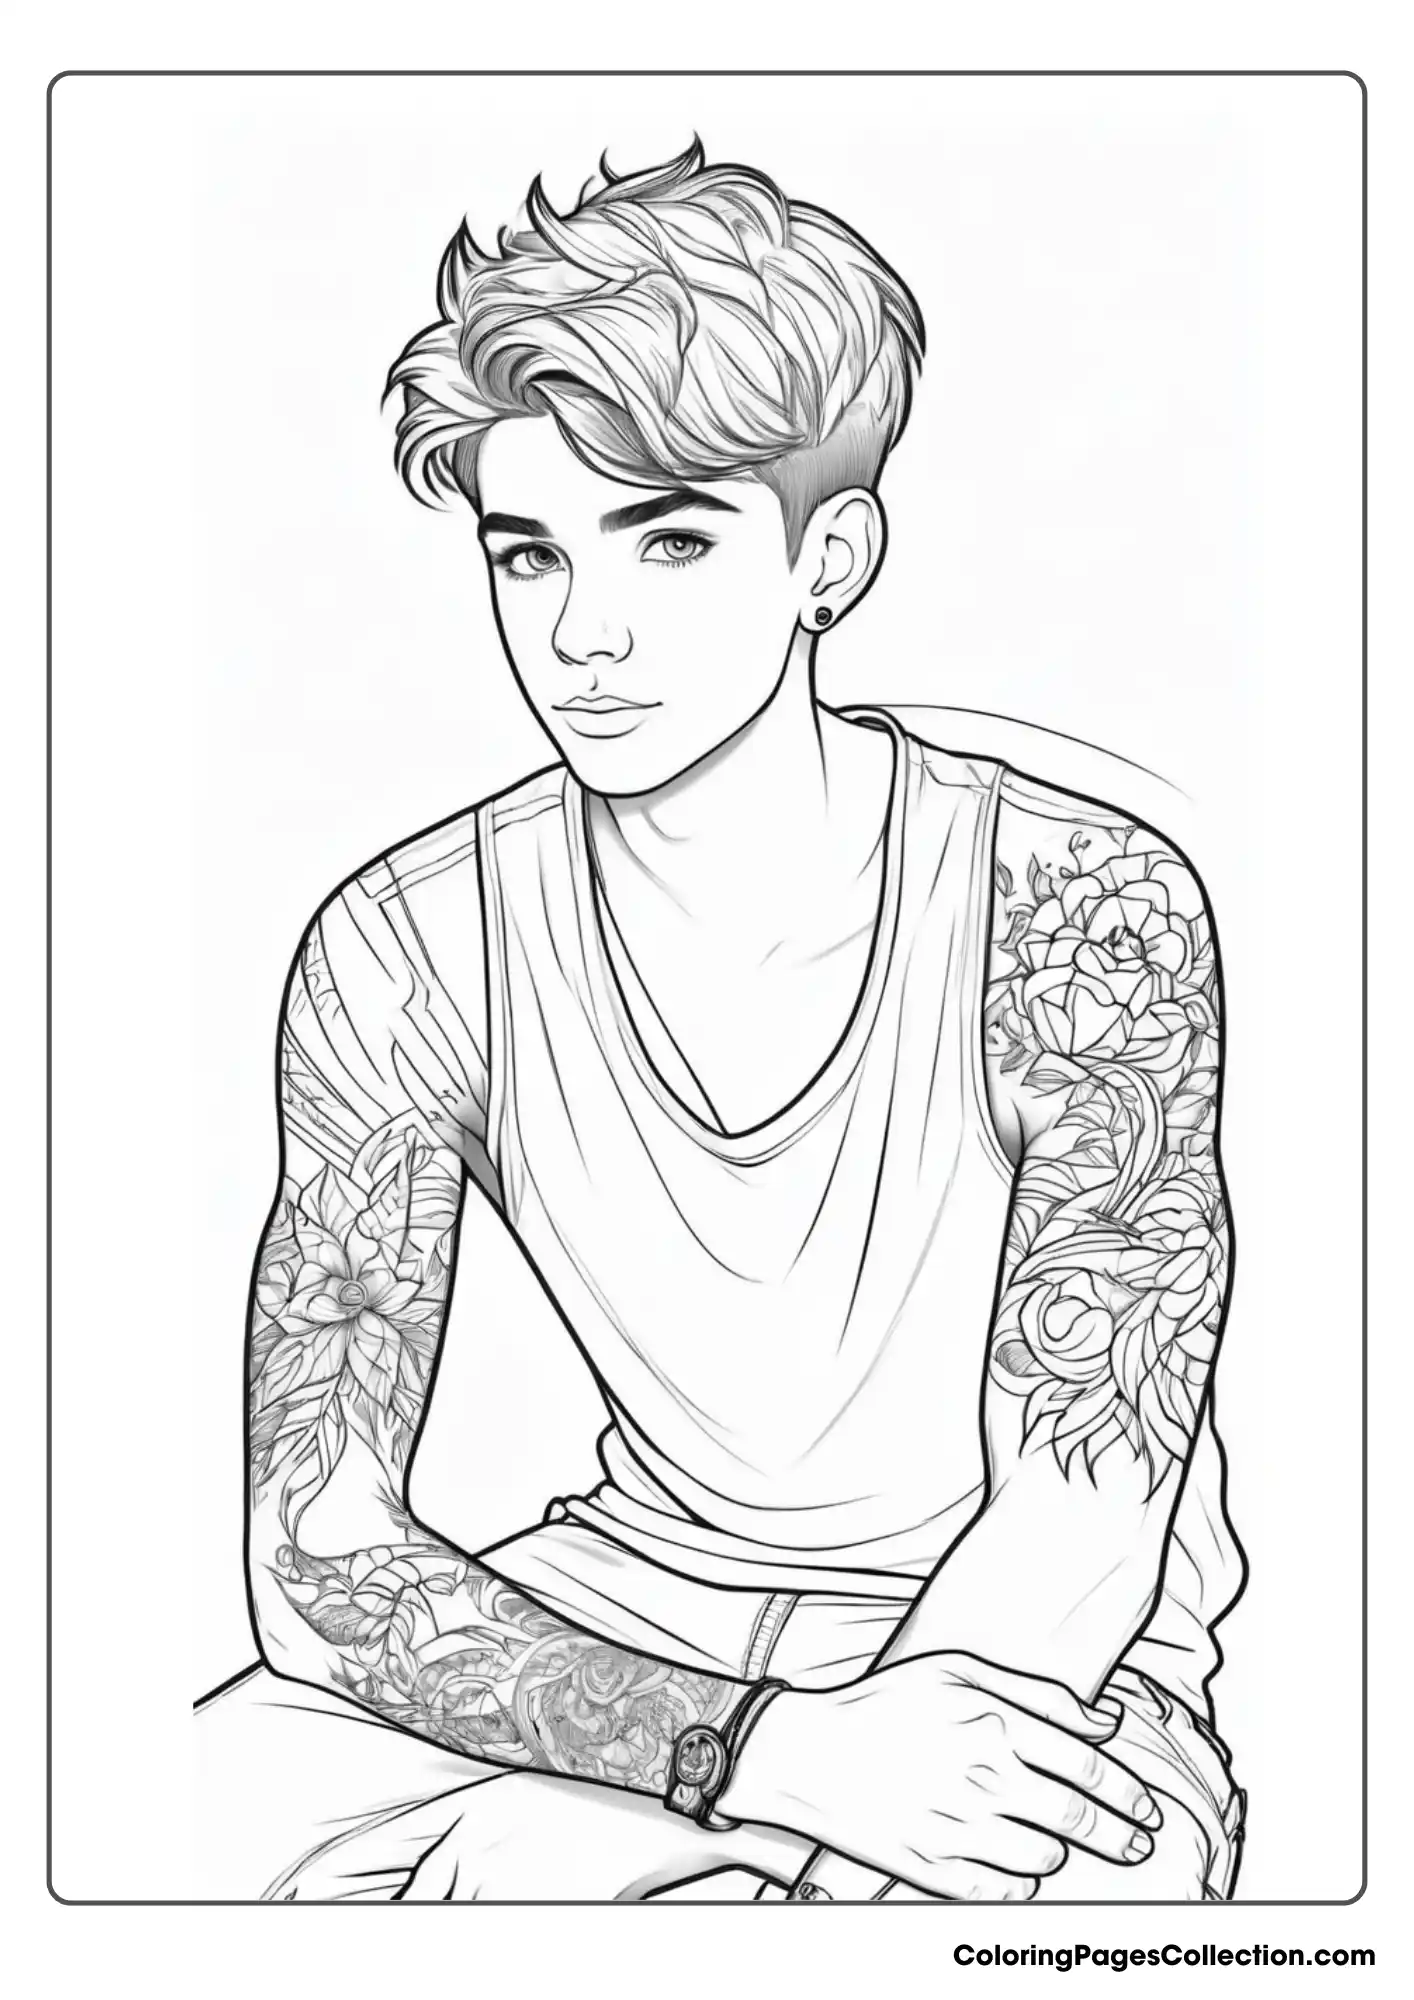 Coloring pages for teens, Realistic Boy with Tattoo on His Both Hands